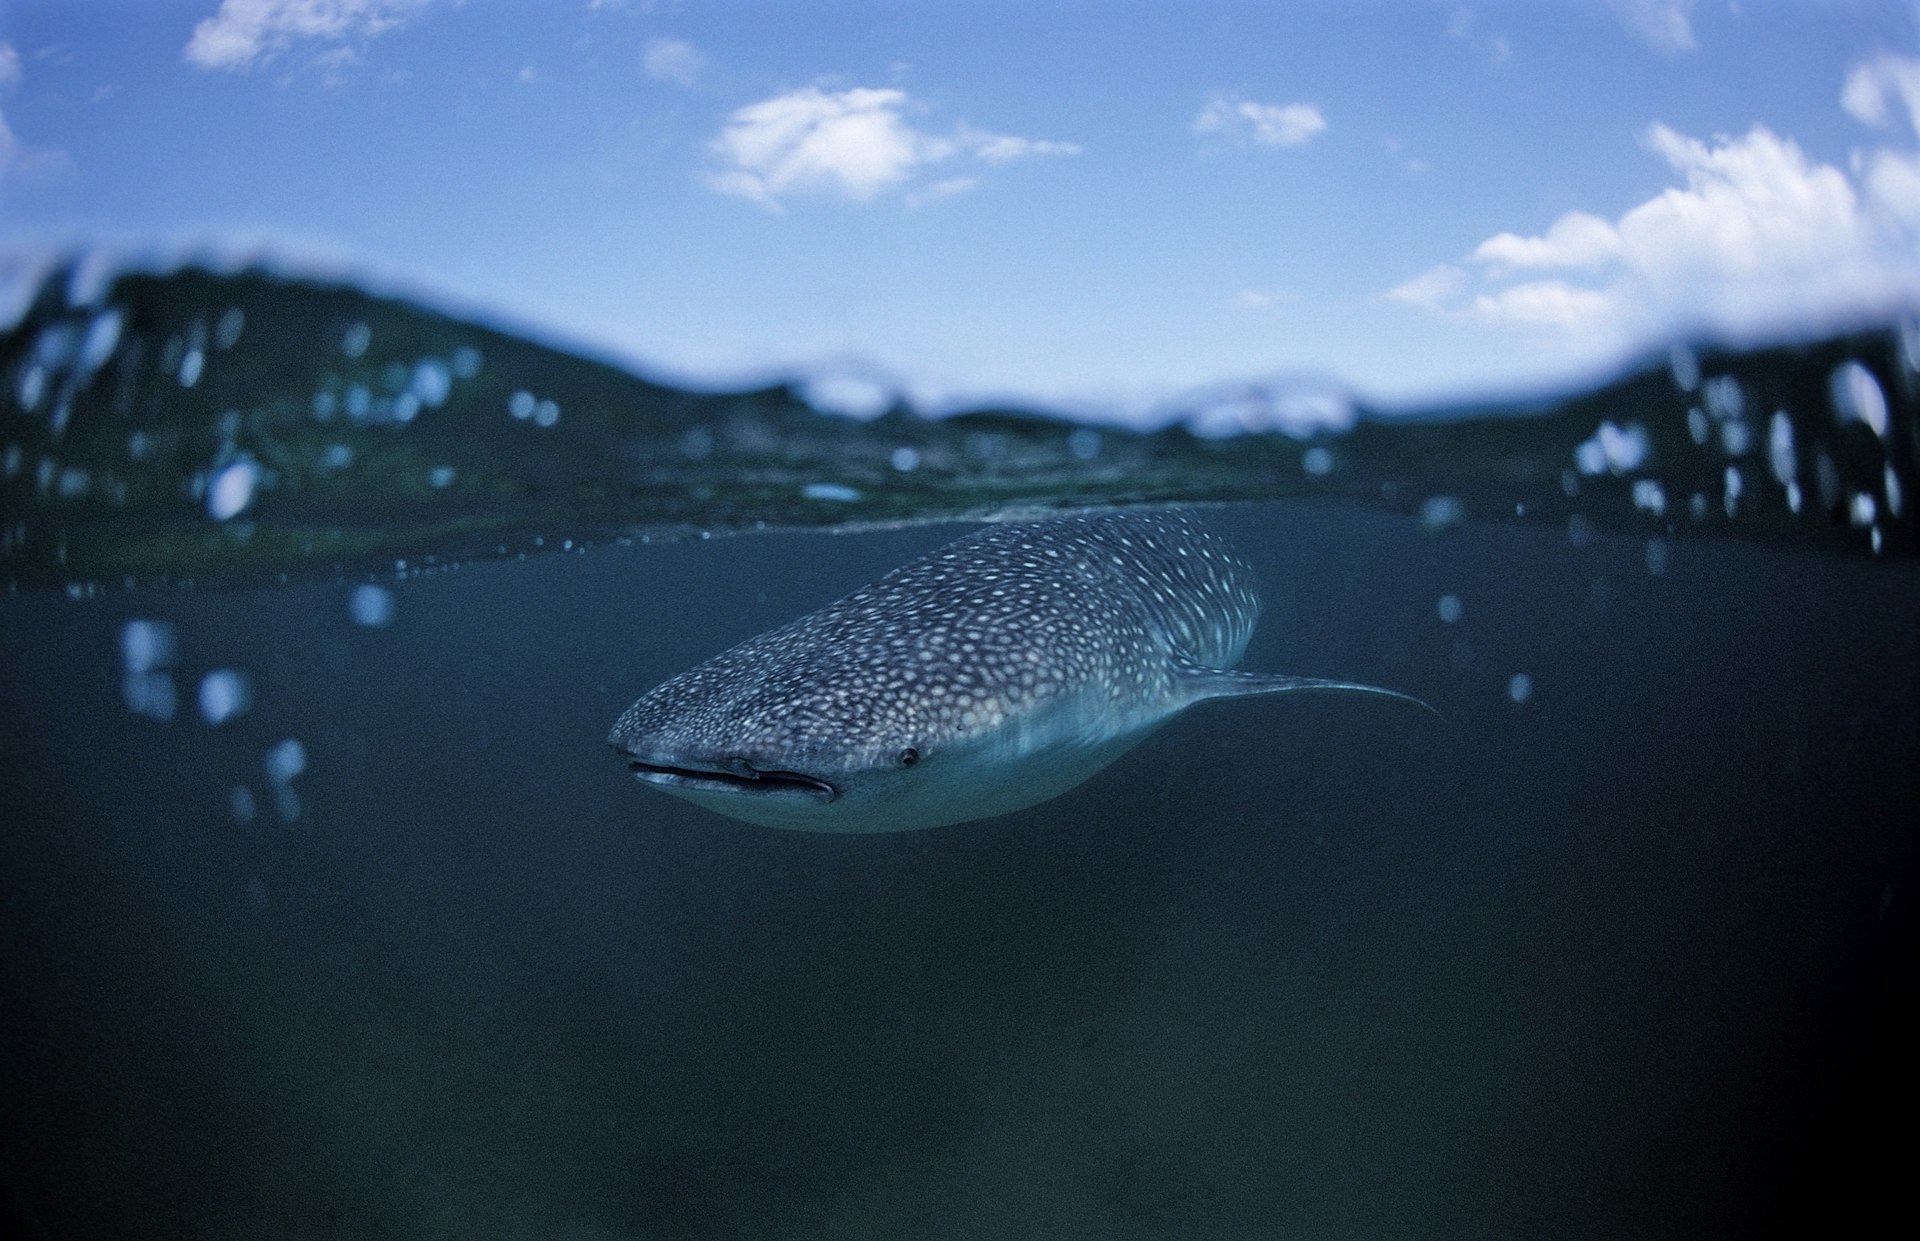 An image of a whale shark in Djibouti with the camera half in and half out of the water, showing the large fish under the surface and the sky above the waterline.